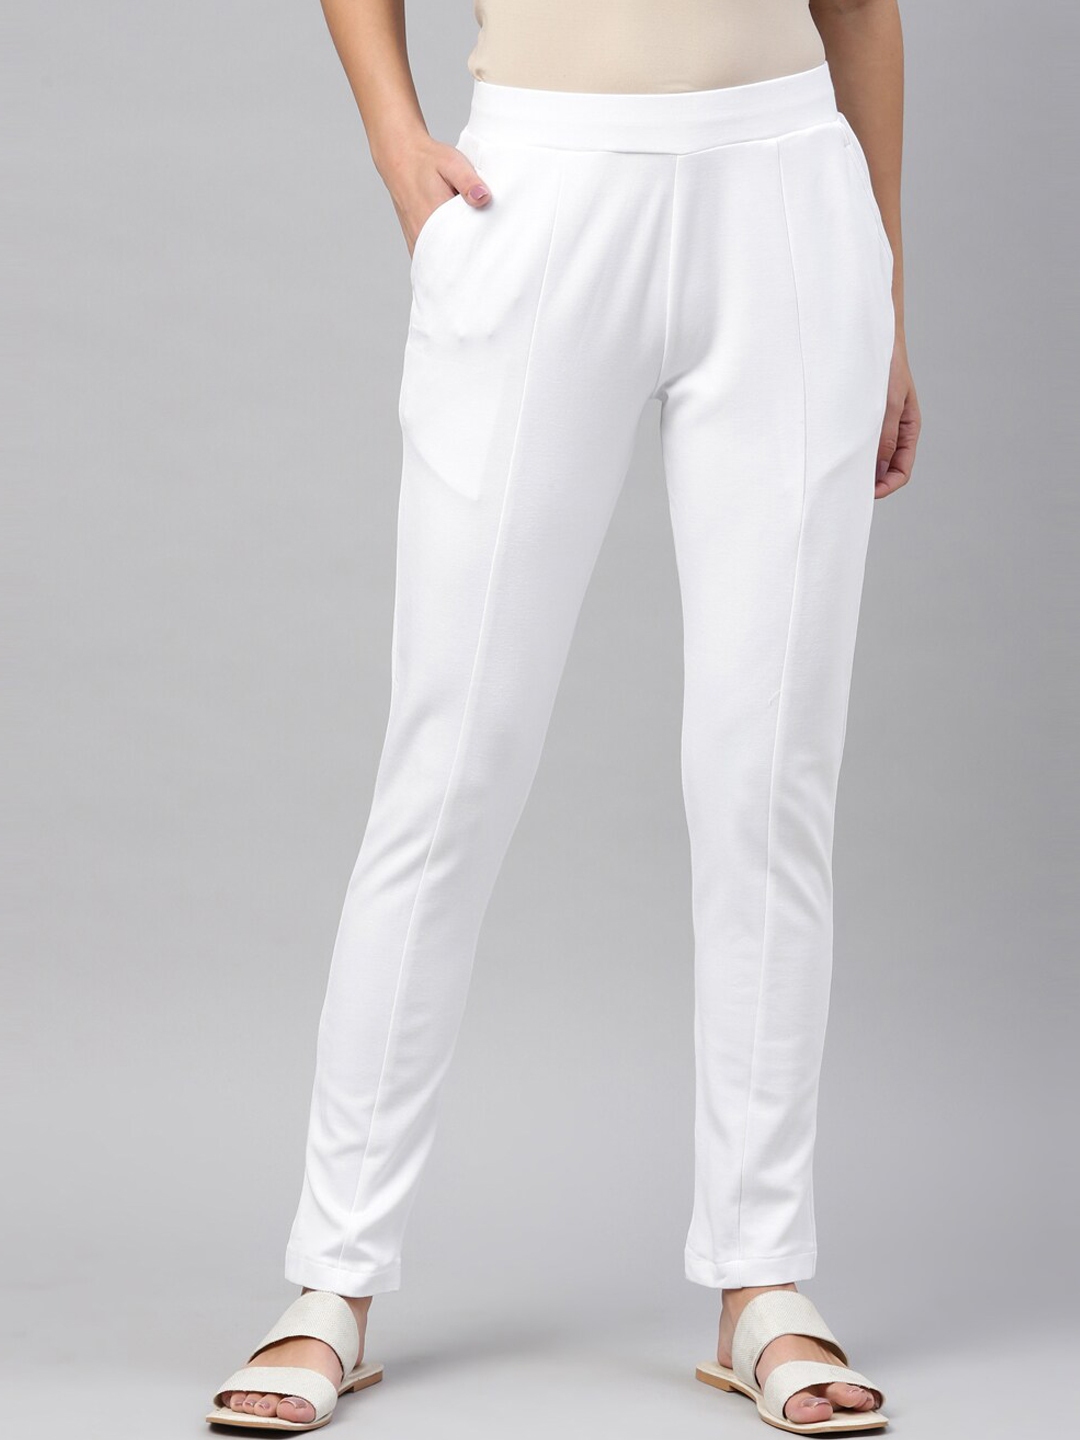 Buy Go Colors Women White Slim Fit Trousers - Trousers for Women 18289884